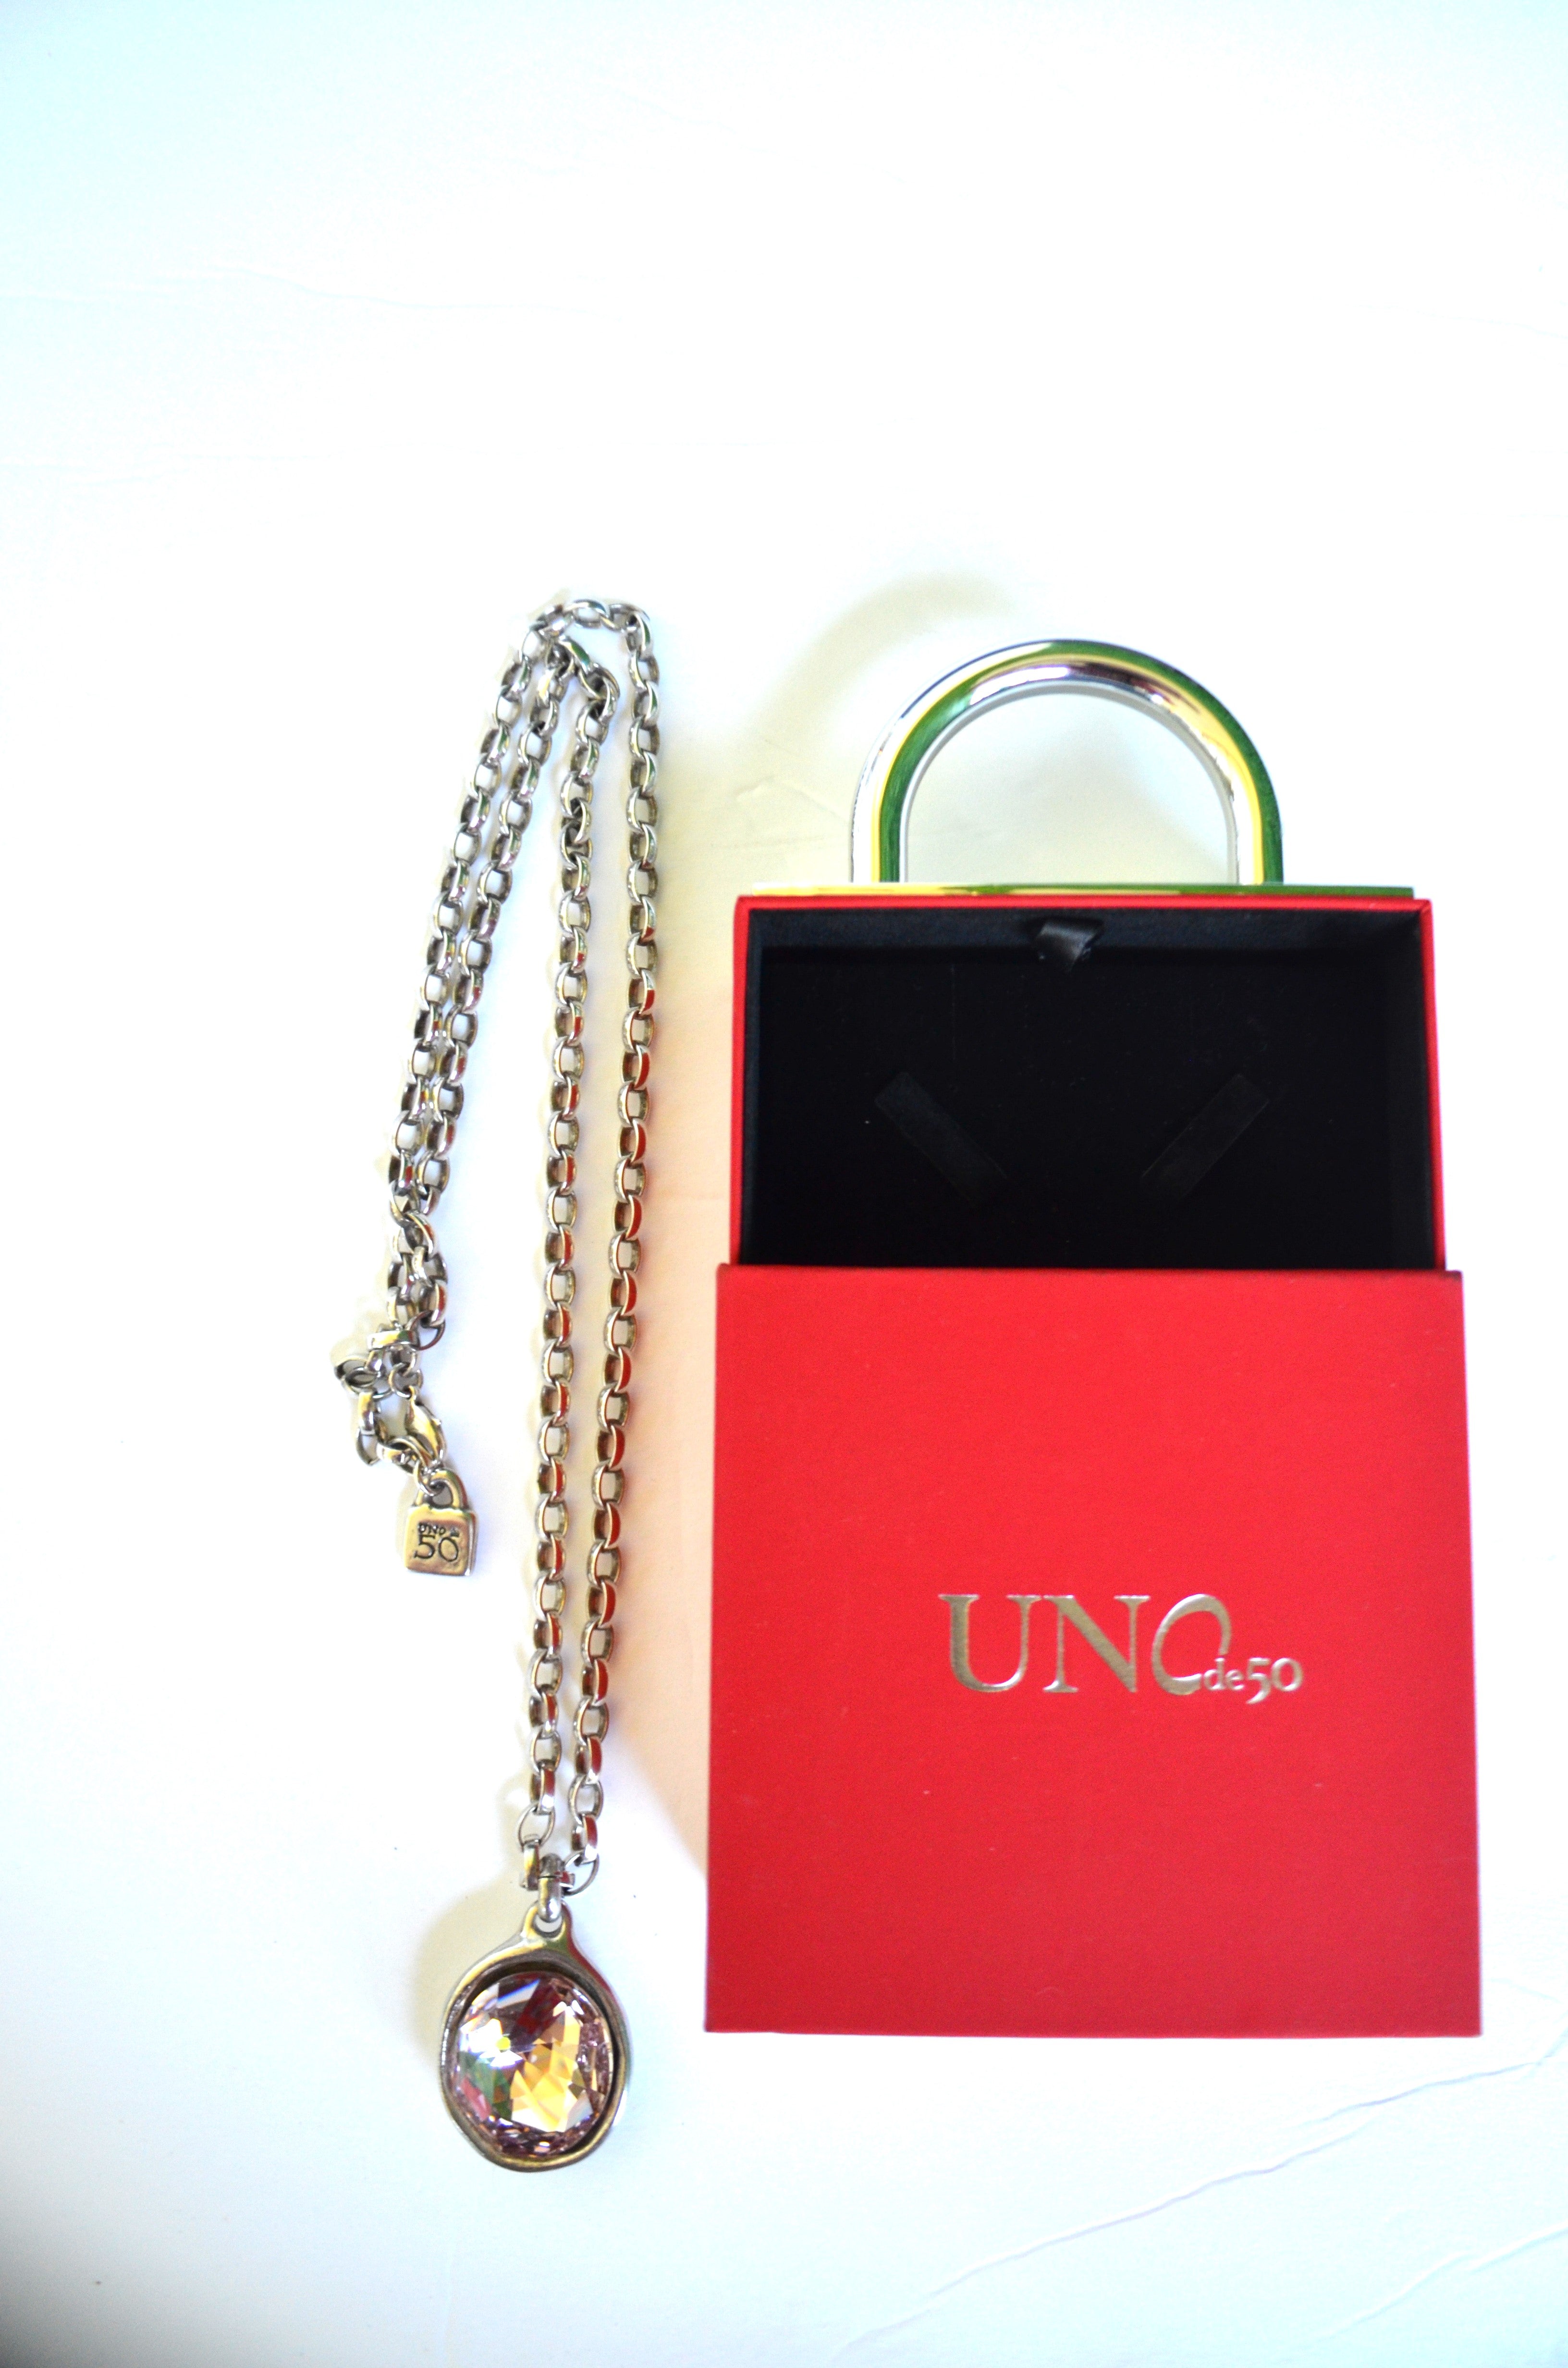 UNO de 50 long necklace charm Silver Plated  Chain-Link Necklace